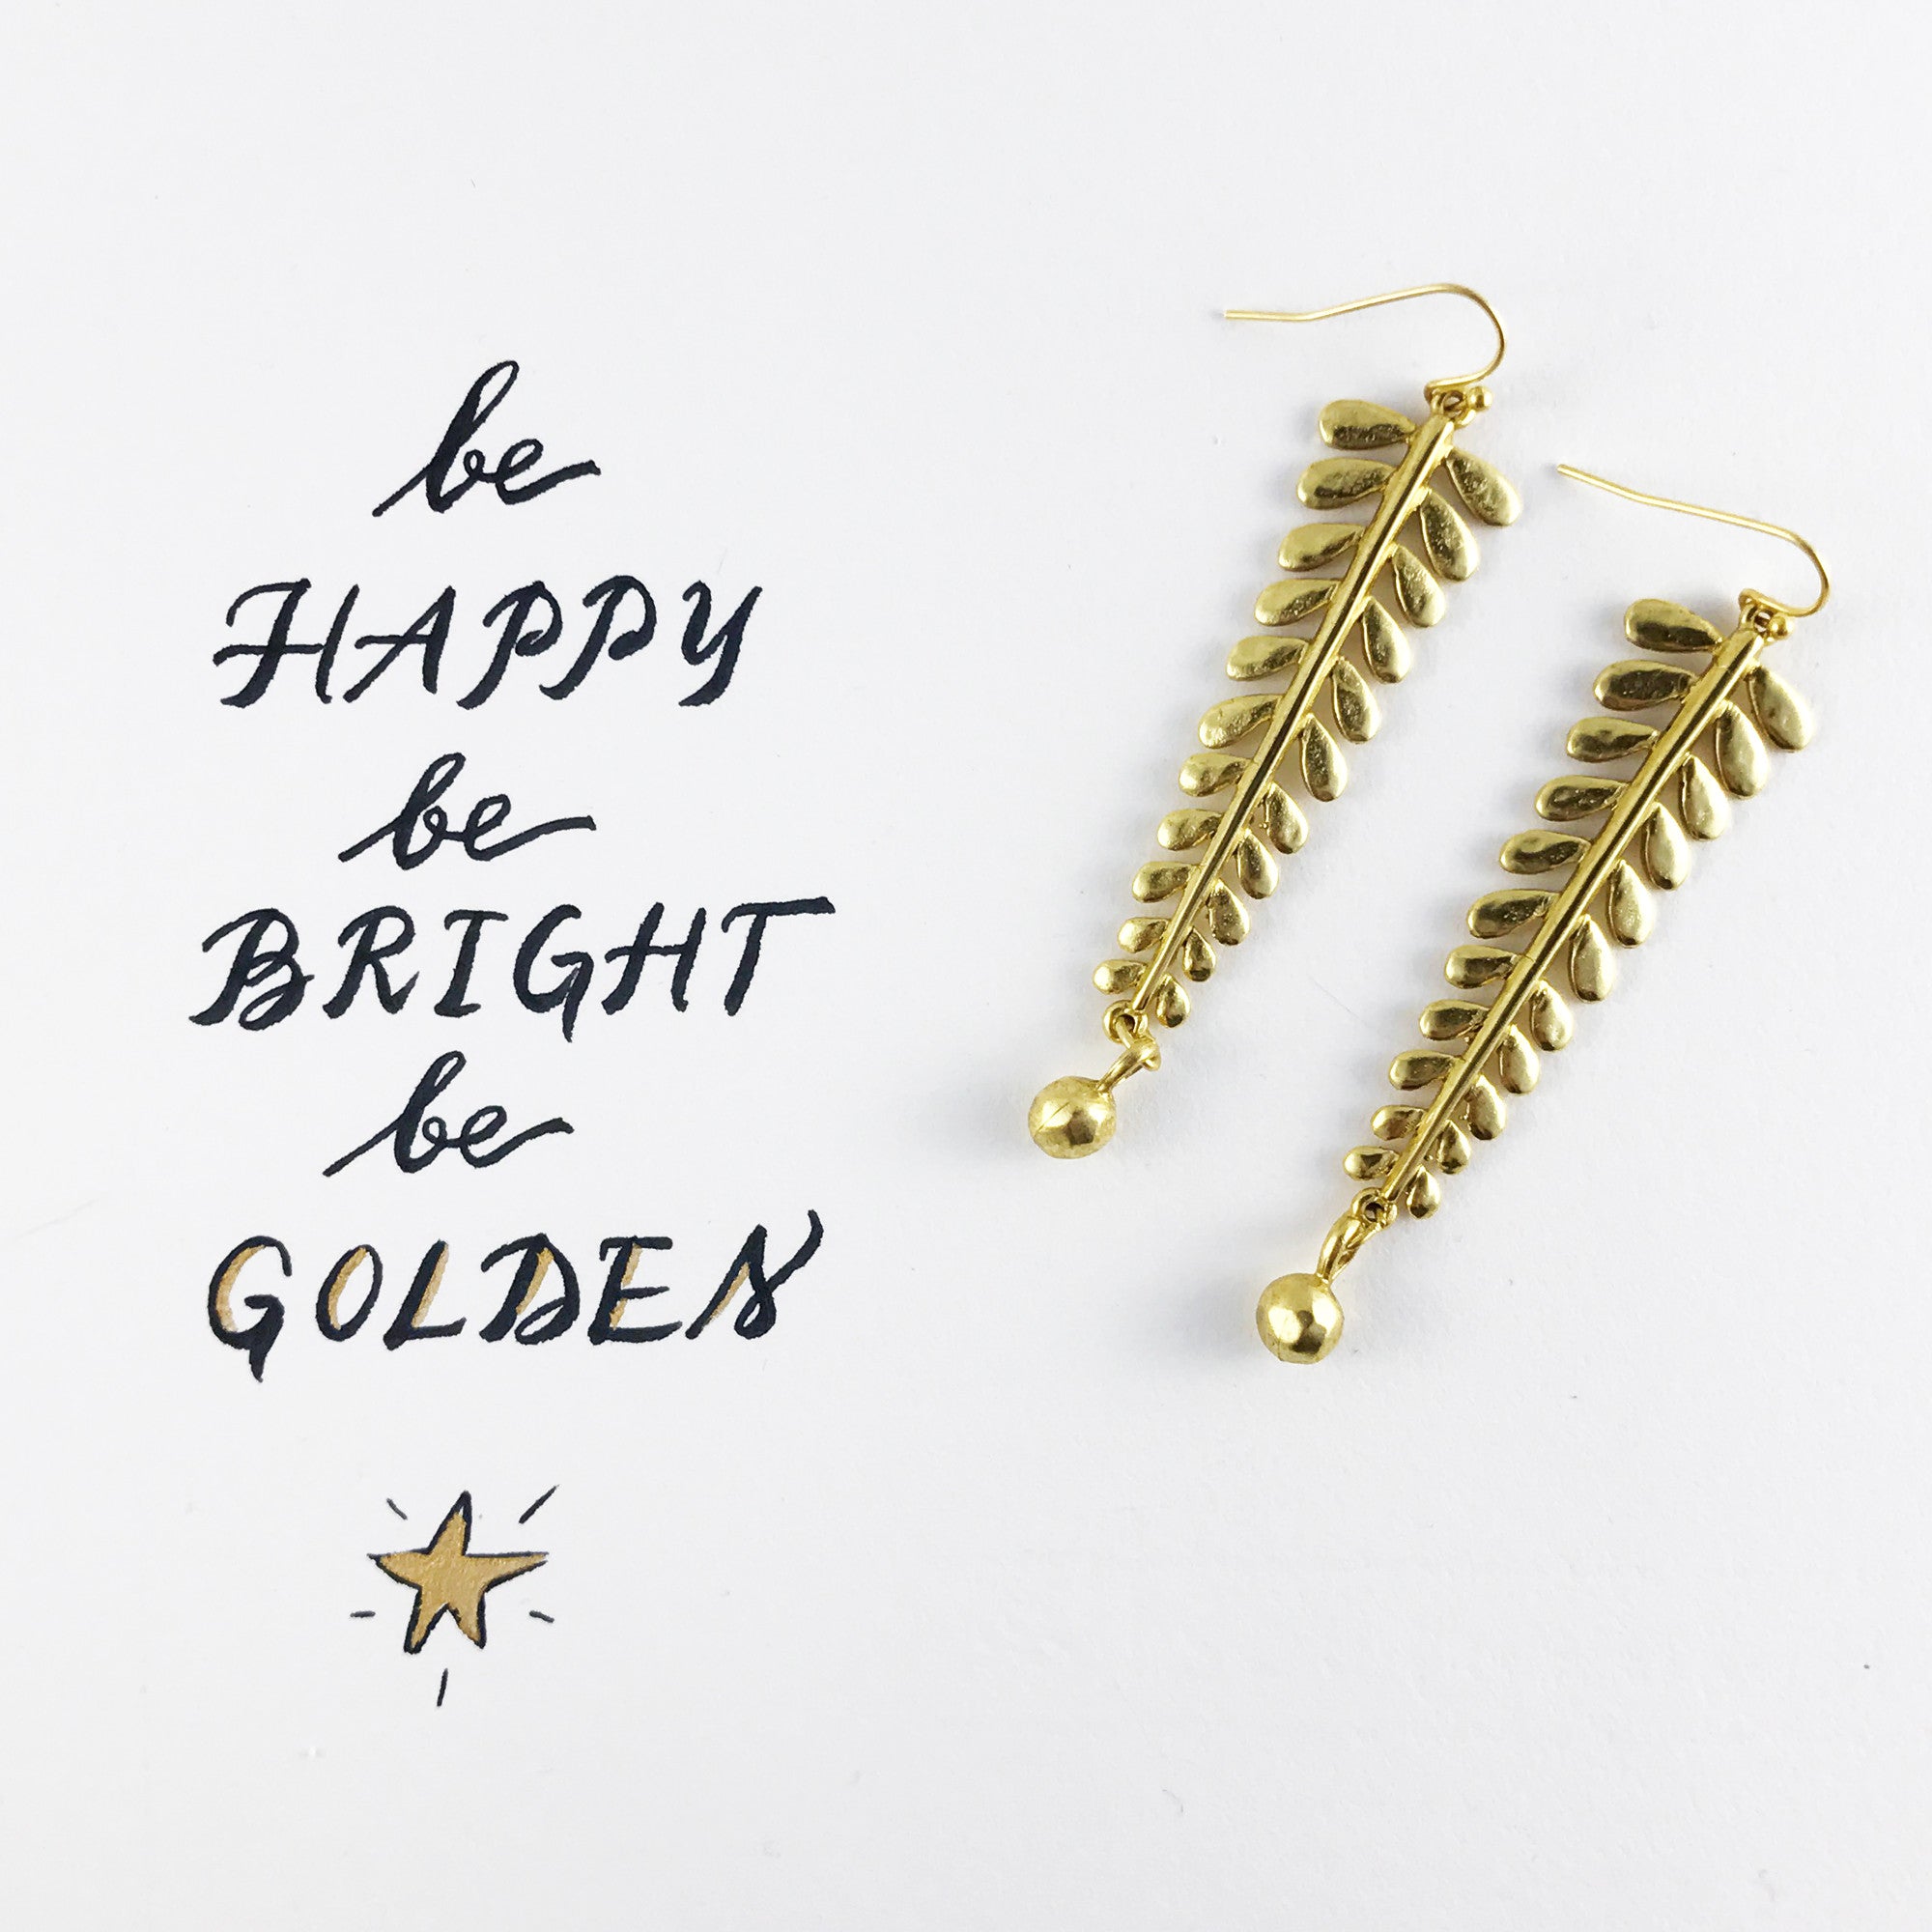 #SequinSayings - Be Bright, Happy & Golden!